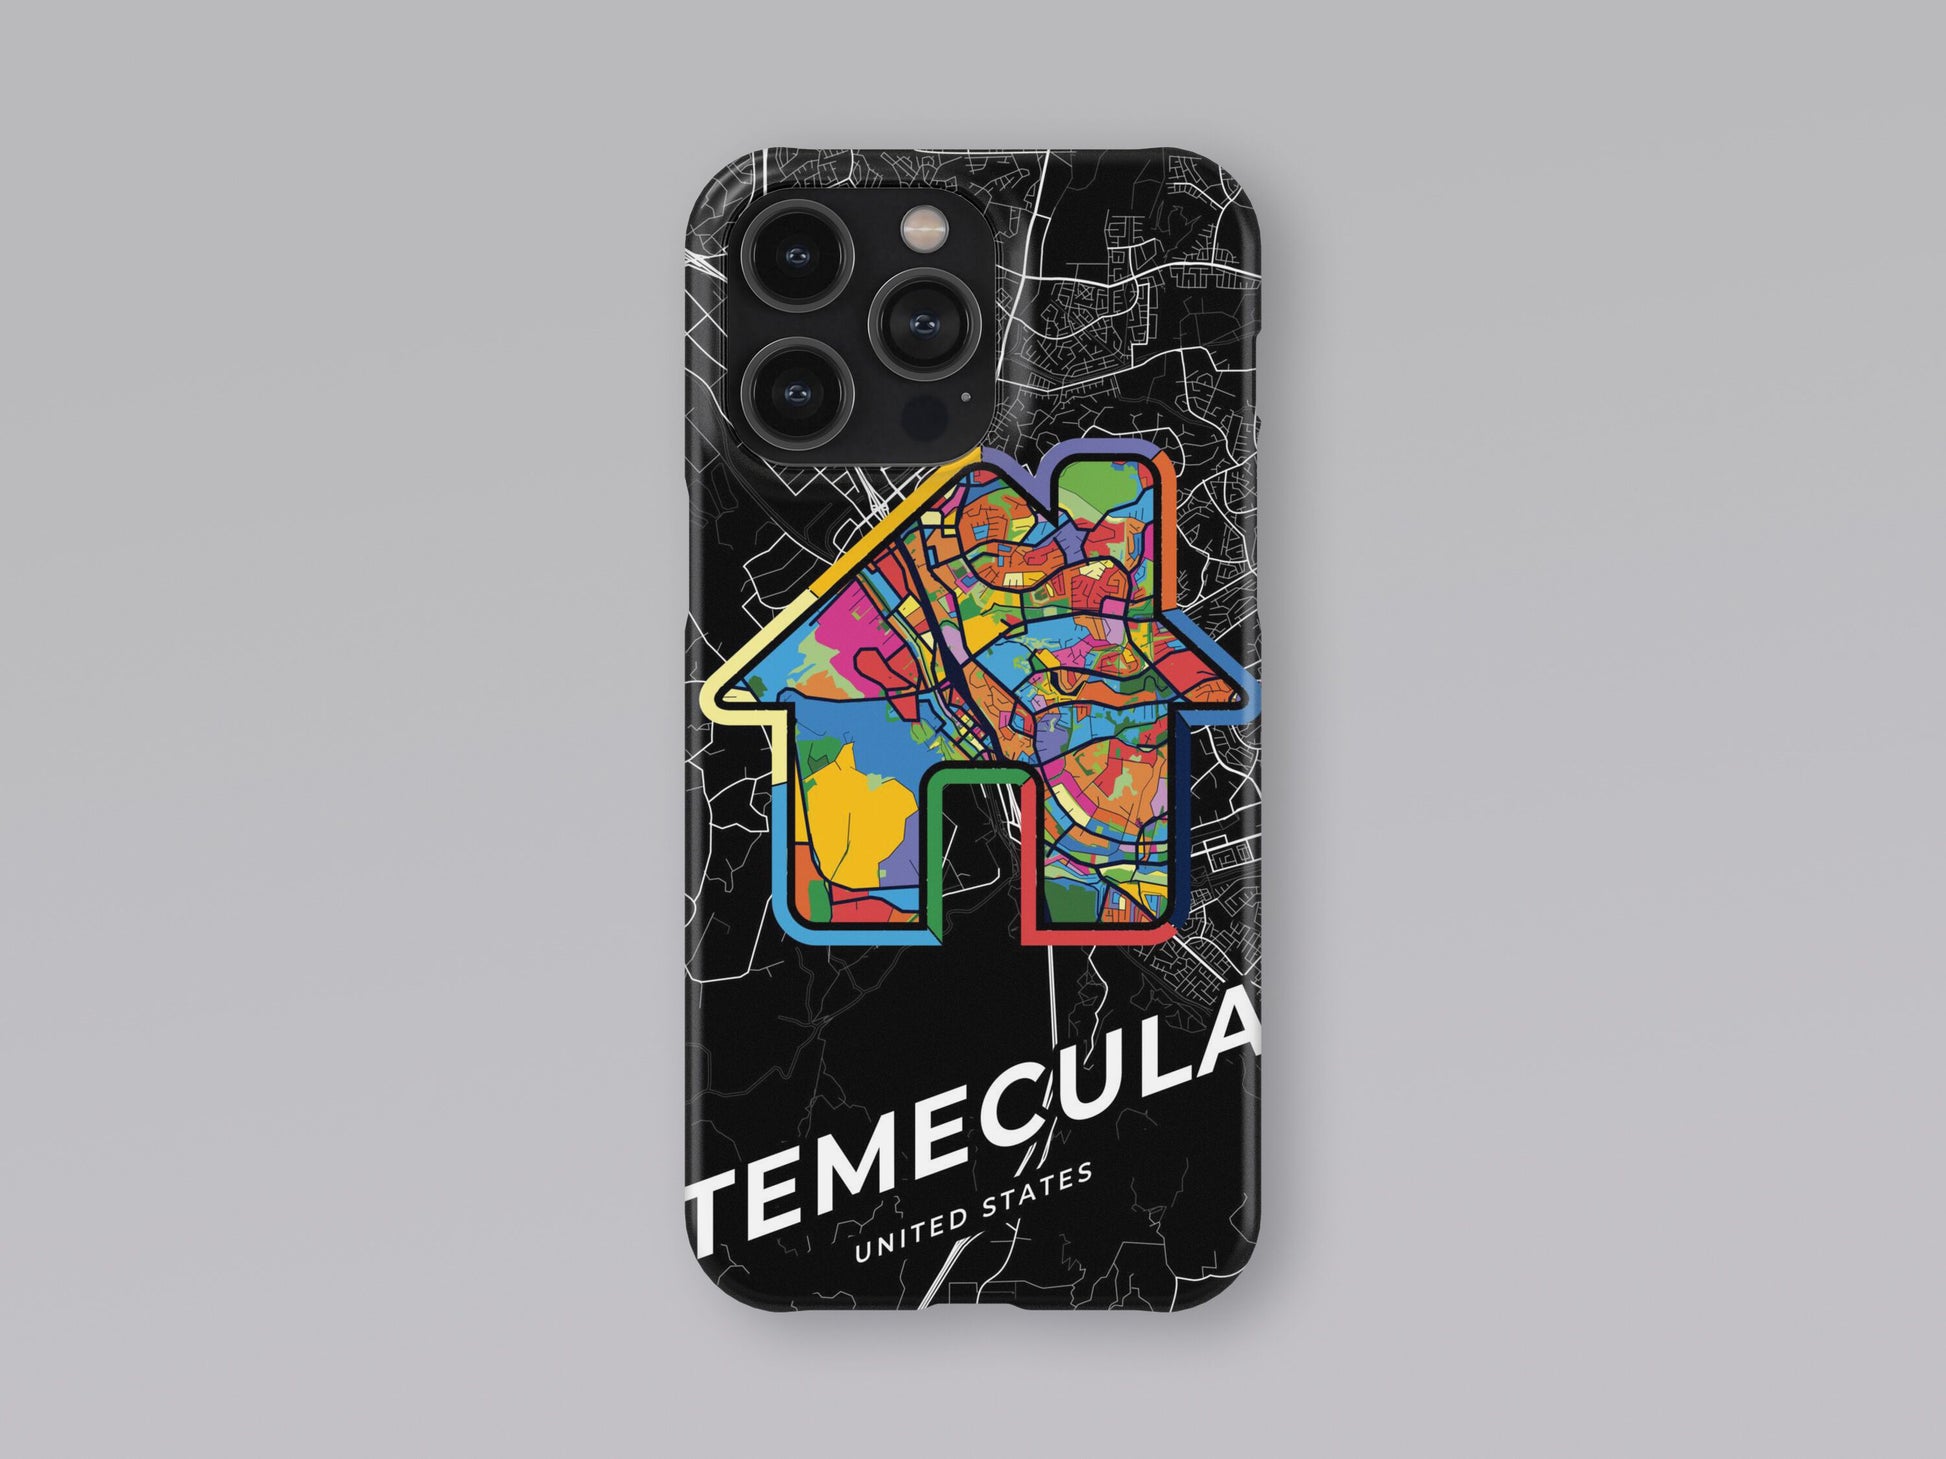 Temecula California slim phone case with colorful icon 3